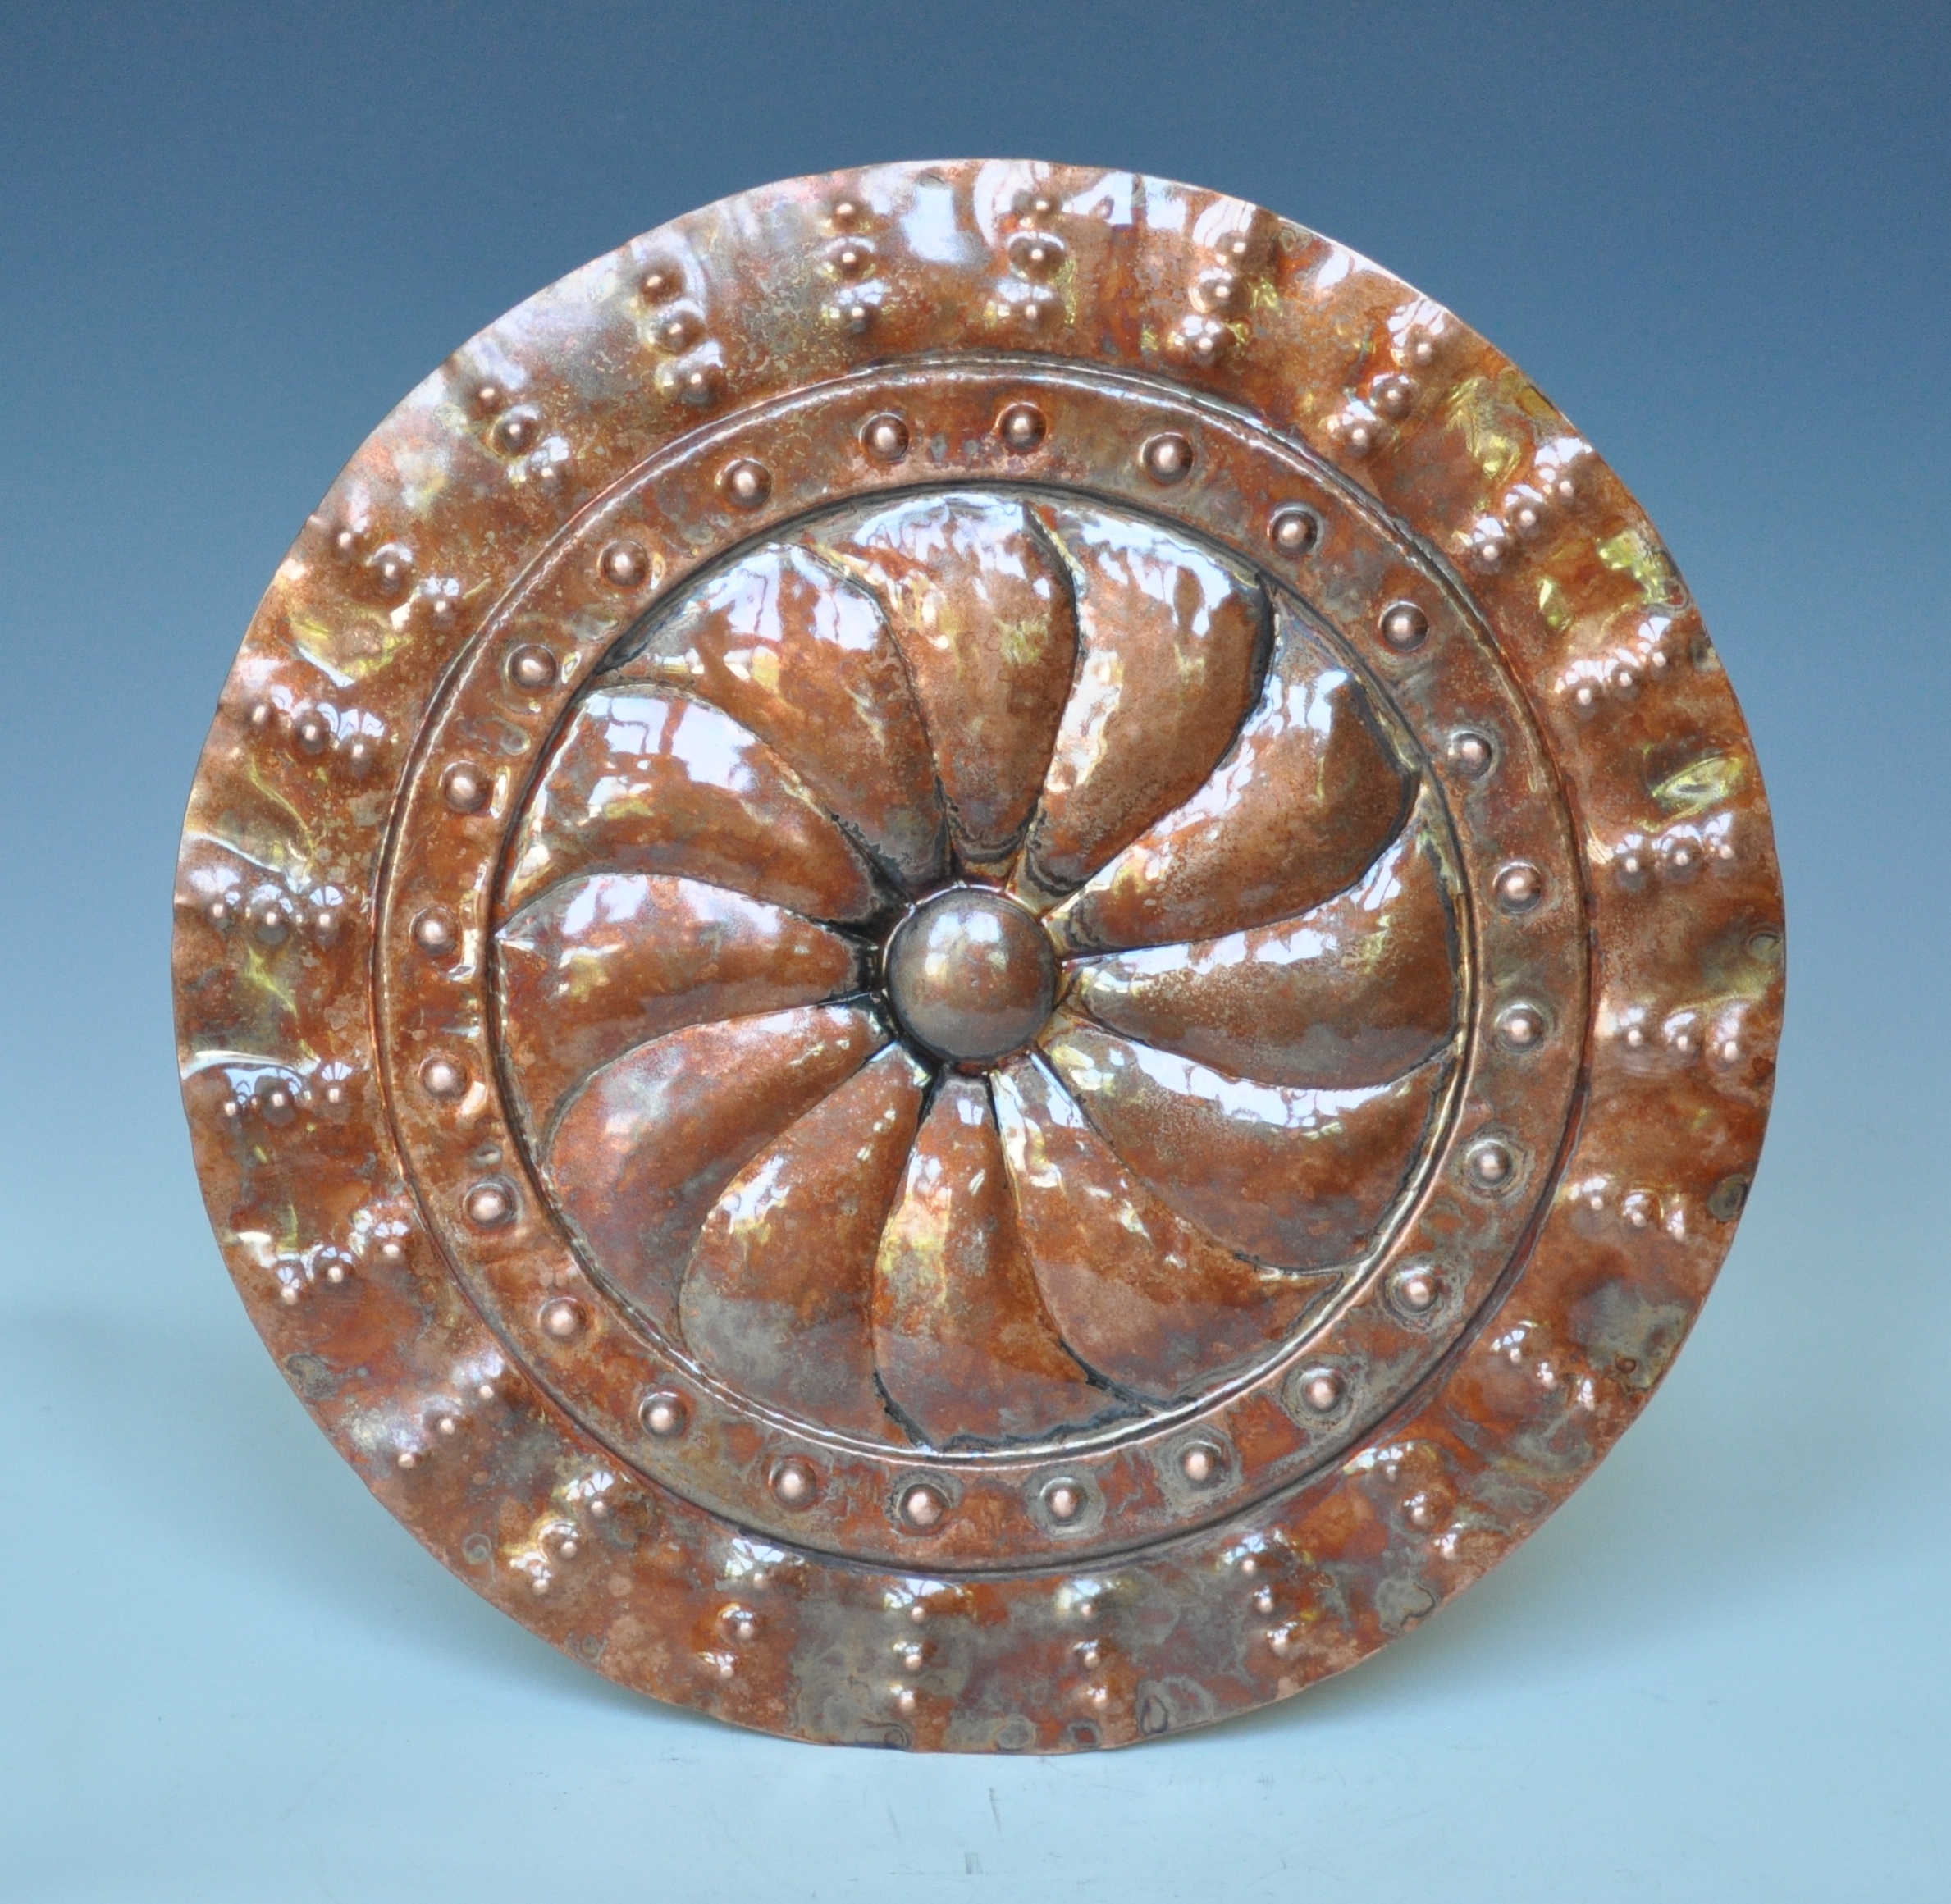 Radiating Platter with Dimples - 12"